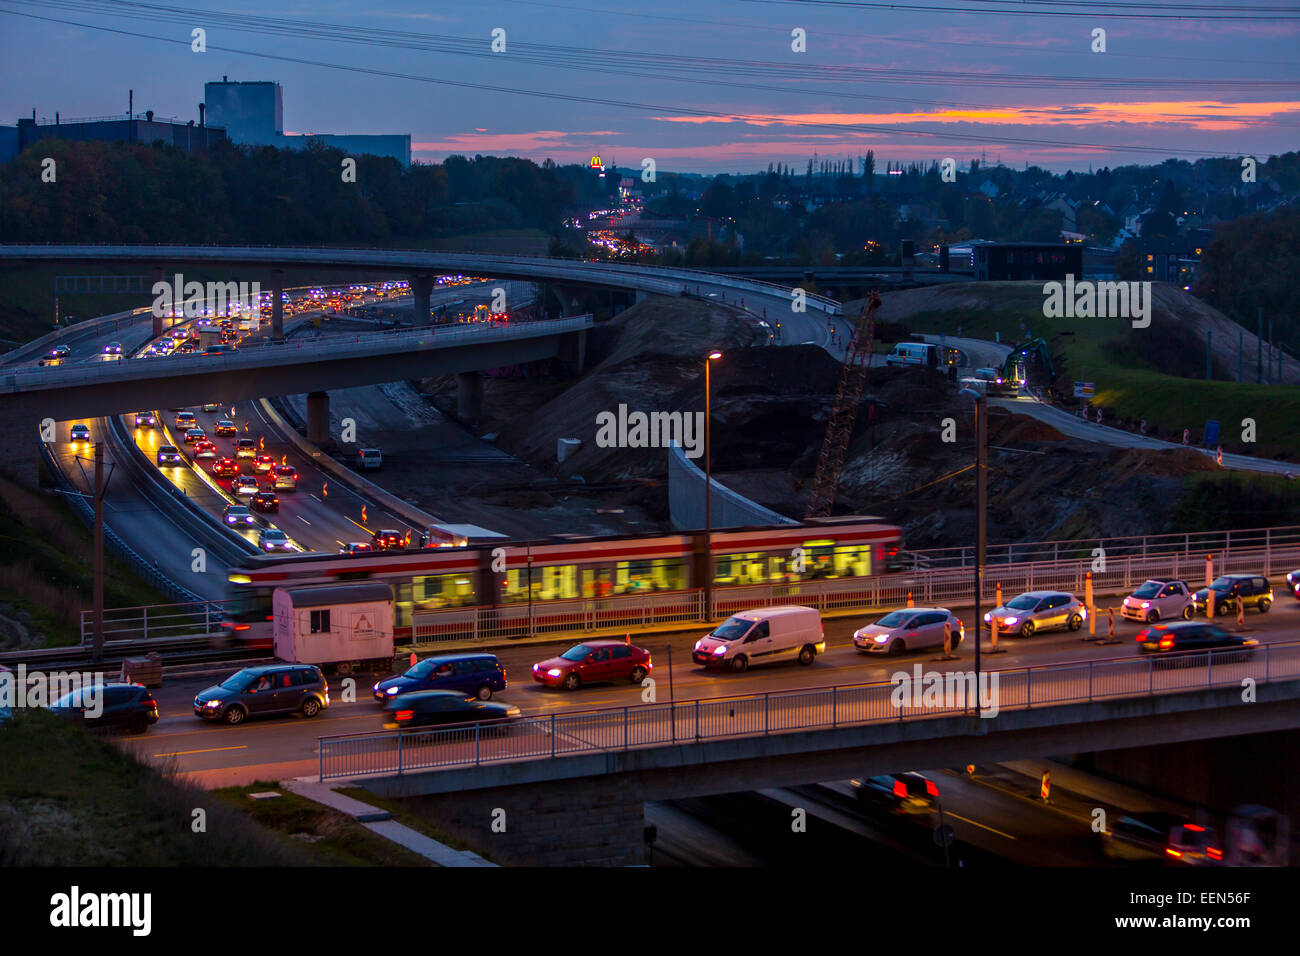 Rush hour, on A40 motorway, Autobahn, at 'West-Kreuz' - intersection west, at dusk, Bochum, Germany Stock Photo